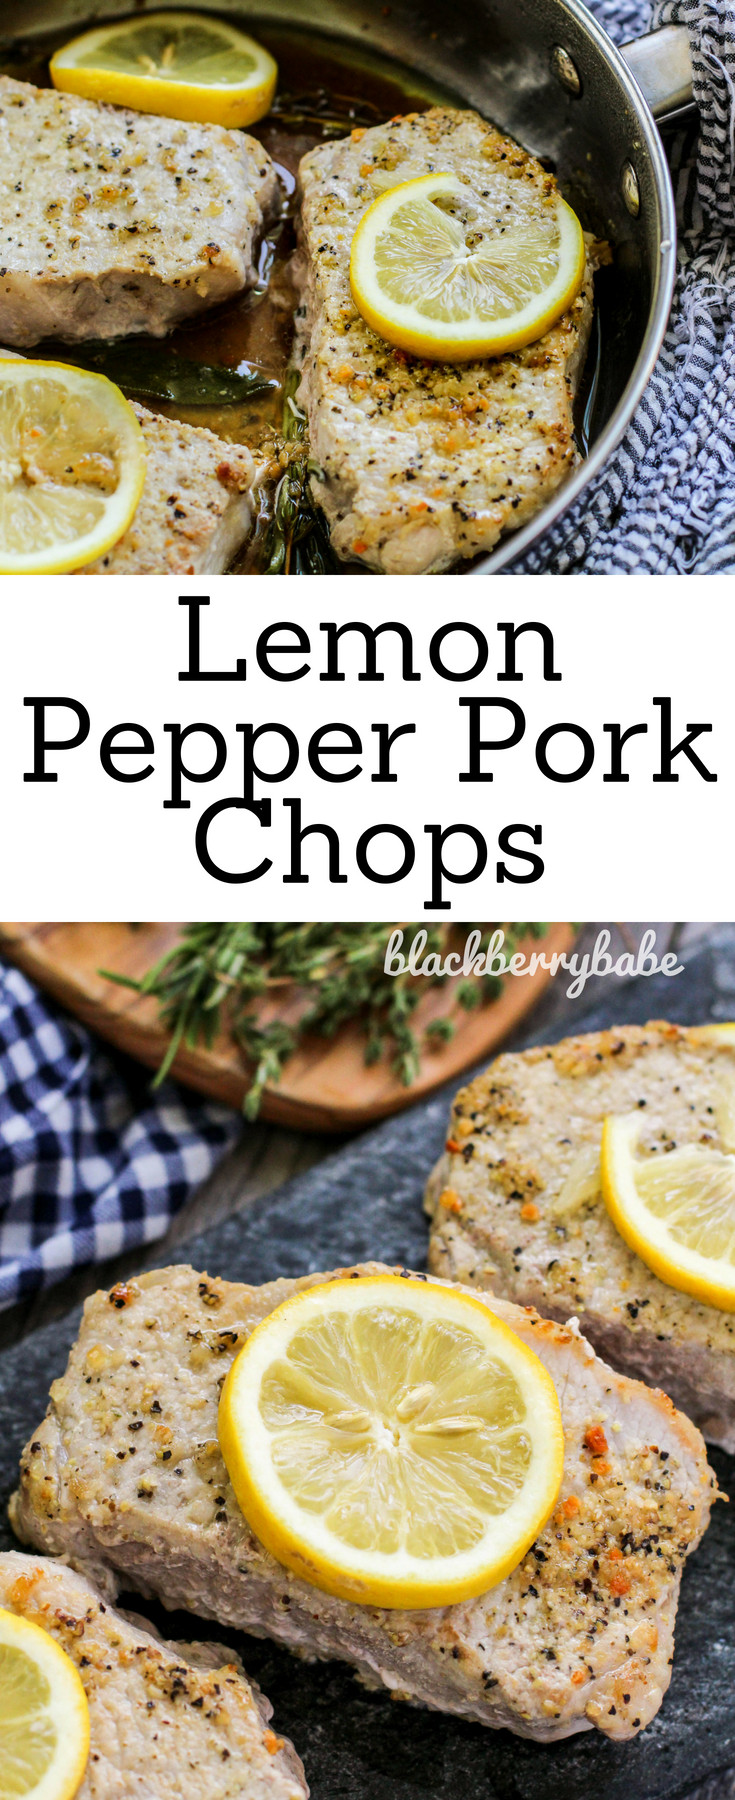 Grilled Pork Chops On Stove
 Lemon Pepper Pork Chop Recipe Stove Top Grill and Oven